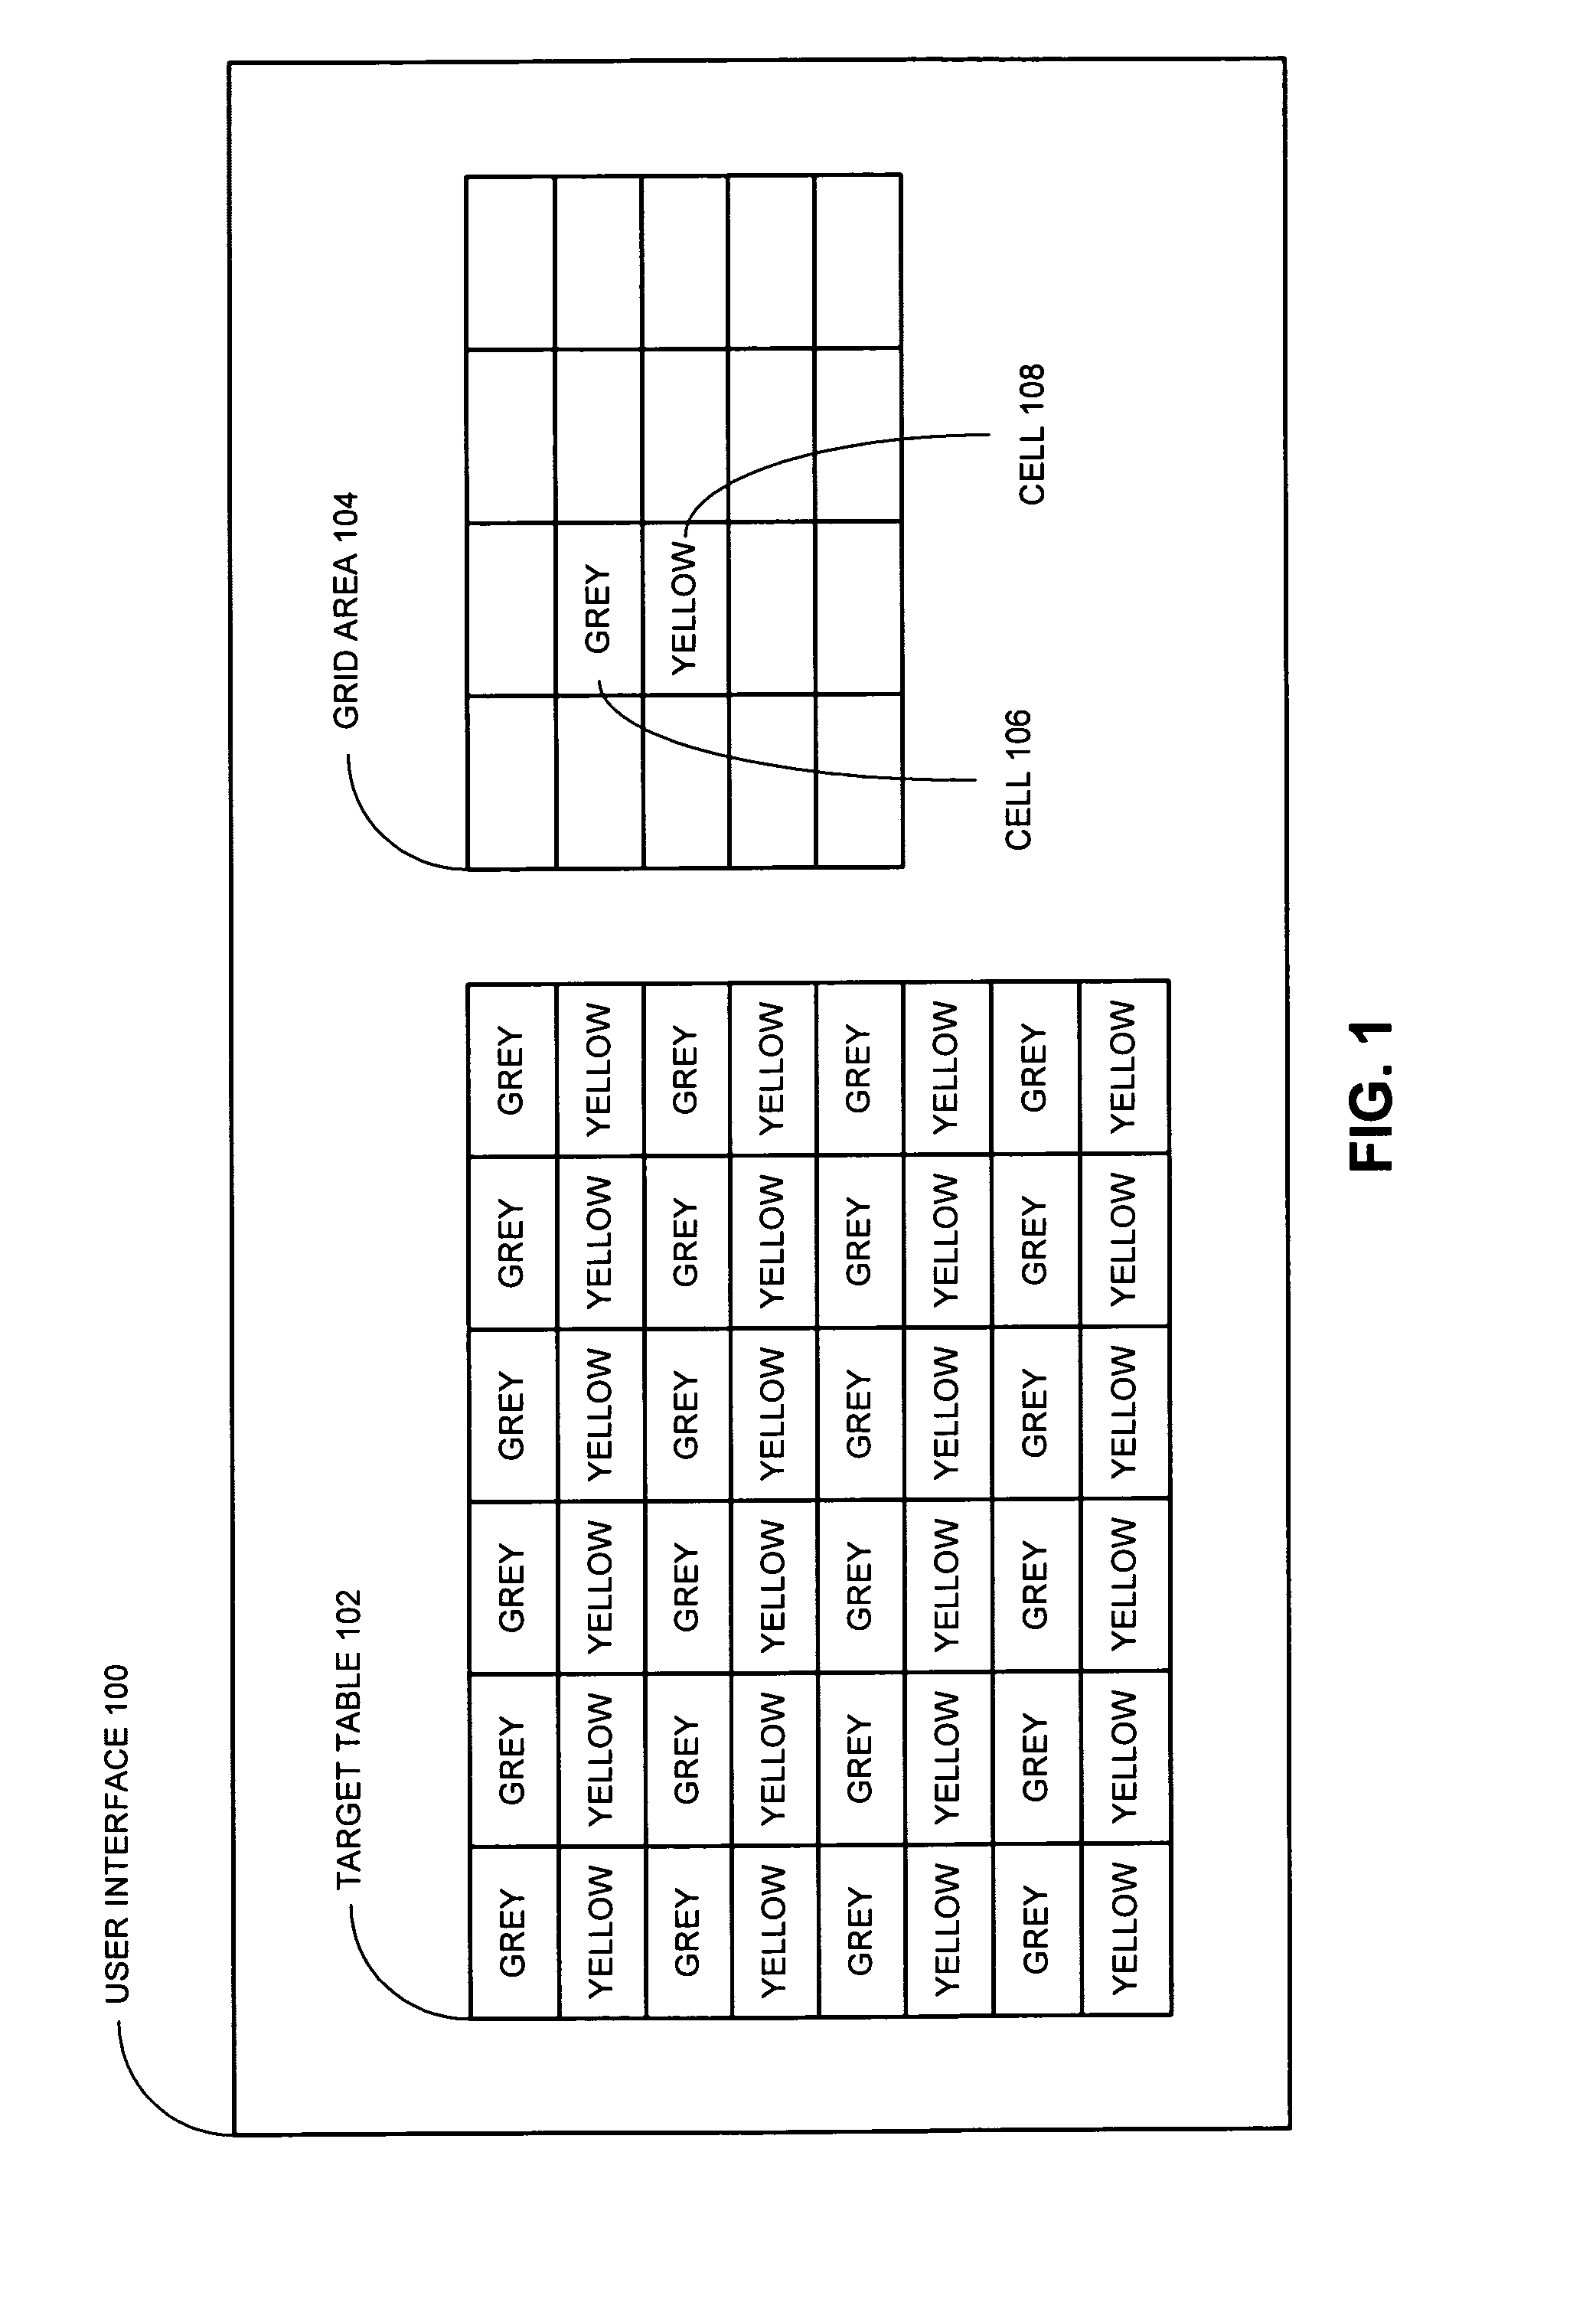 Method and apparatus for defining table styles